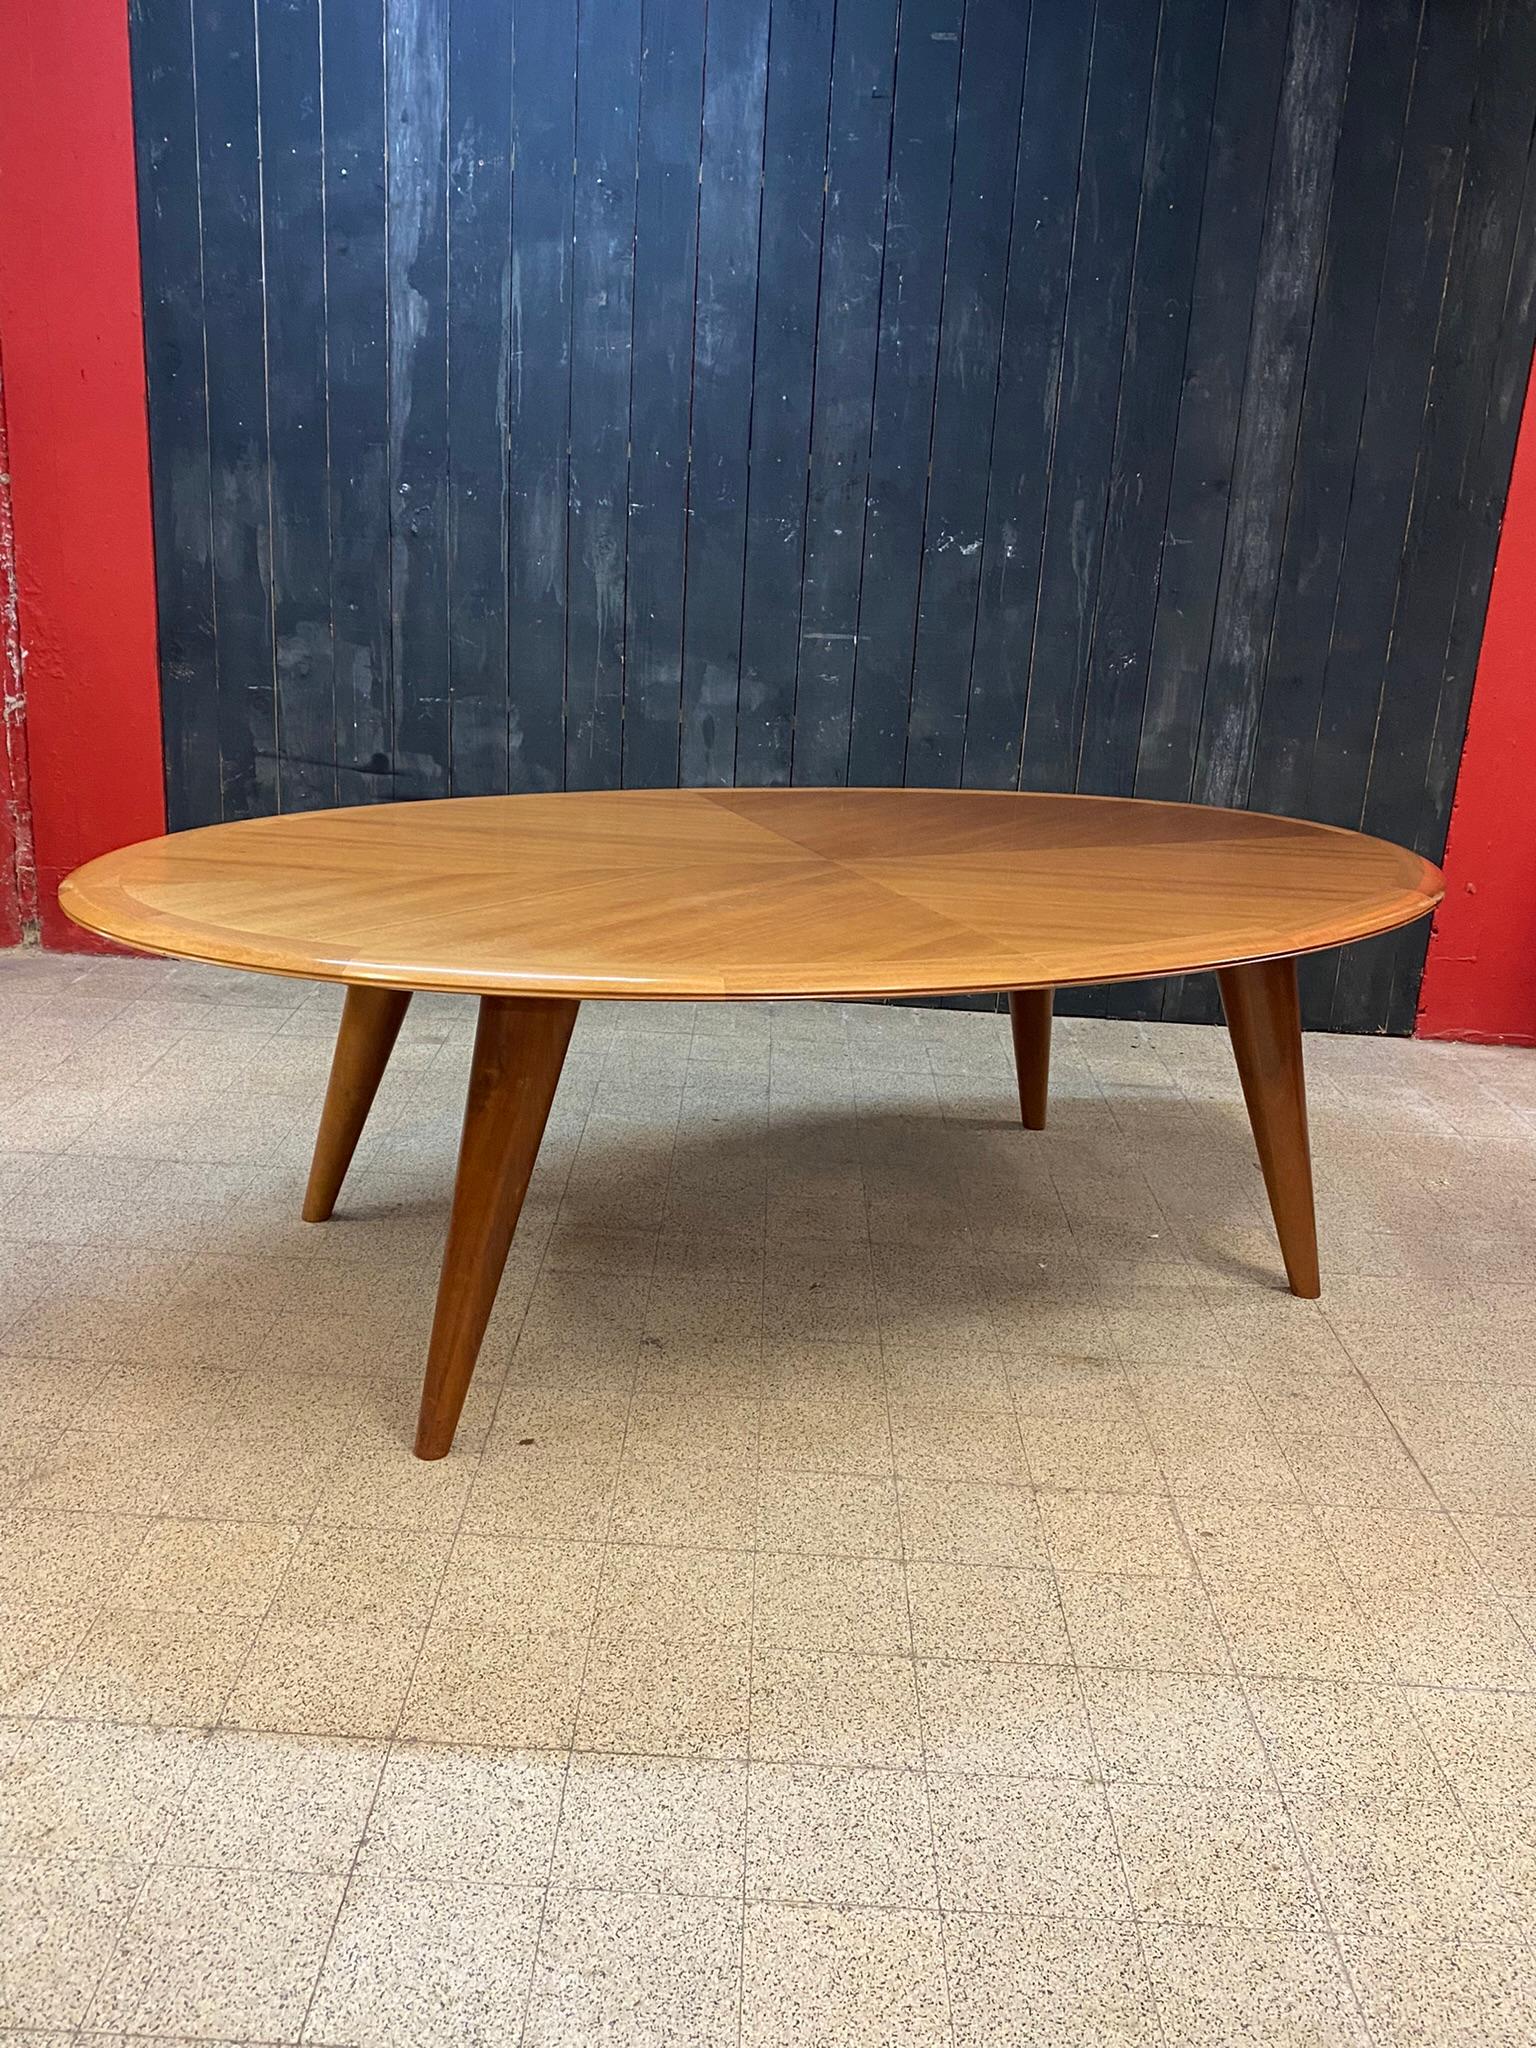 large walnut table circa 1960
the feet disassemble for transport